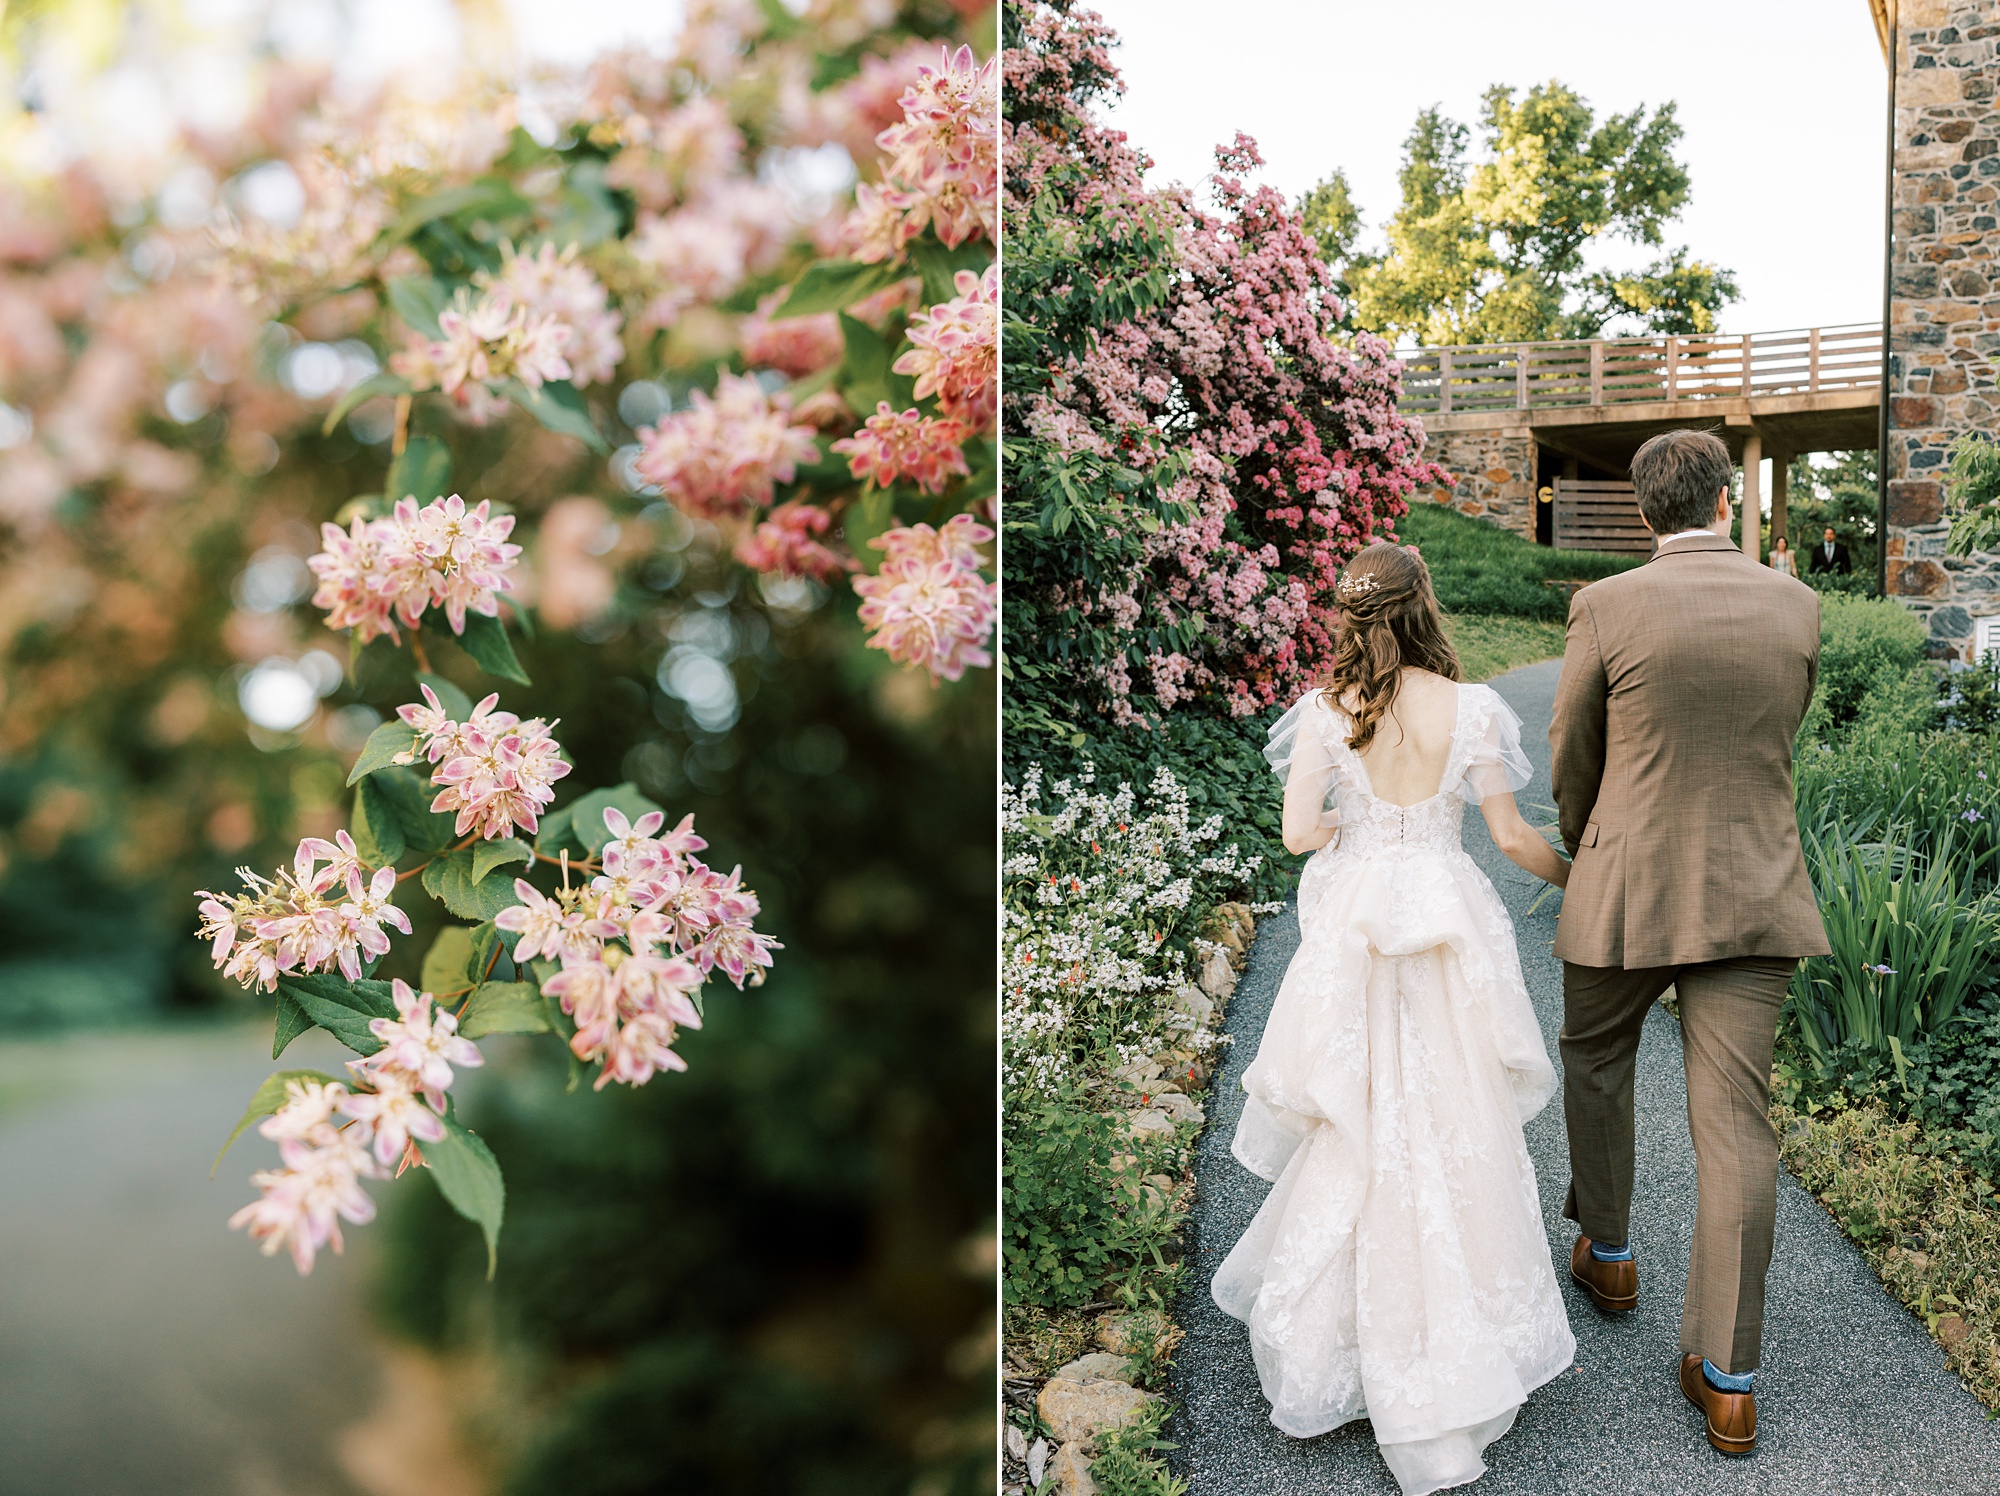 newlyweds walk in gardens by pink bushes 